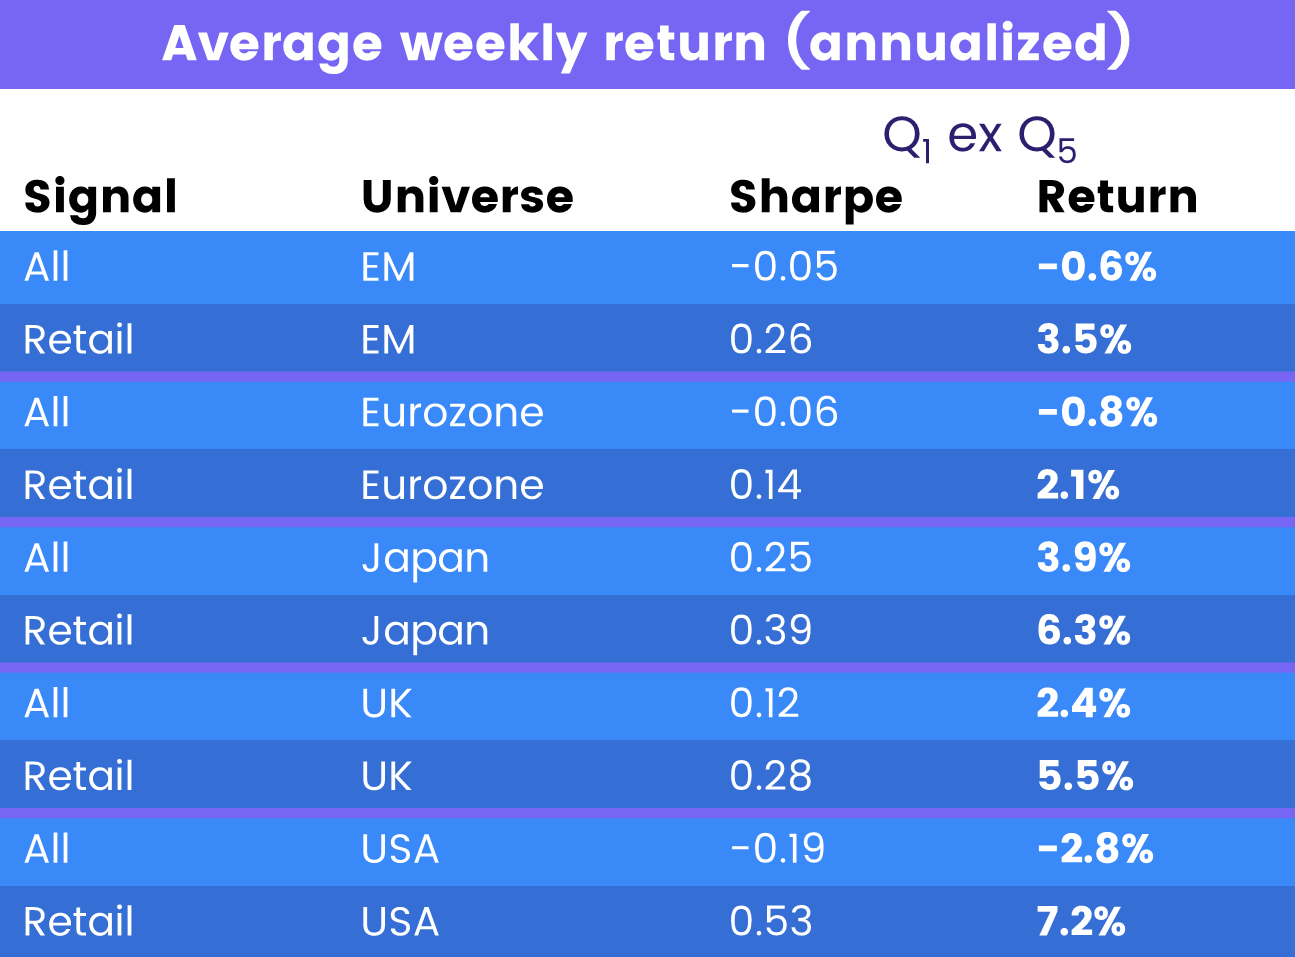 Table depicting the 'Average weekly return (annualized) for emerging markets, Eurozone, Japan, UK and USA'.